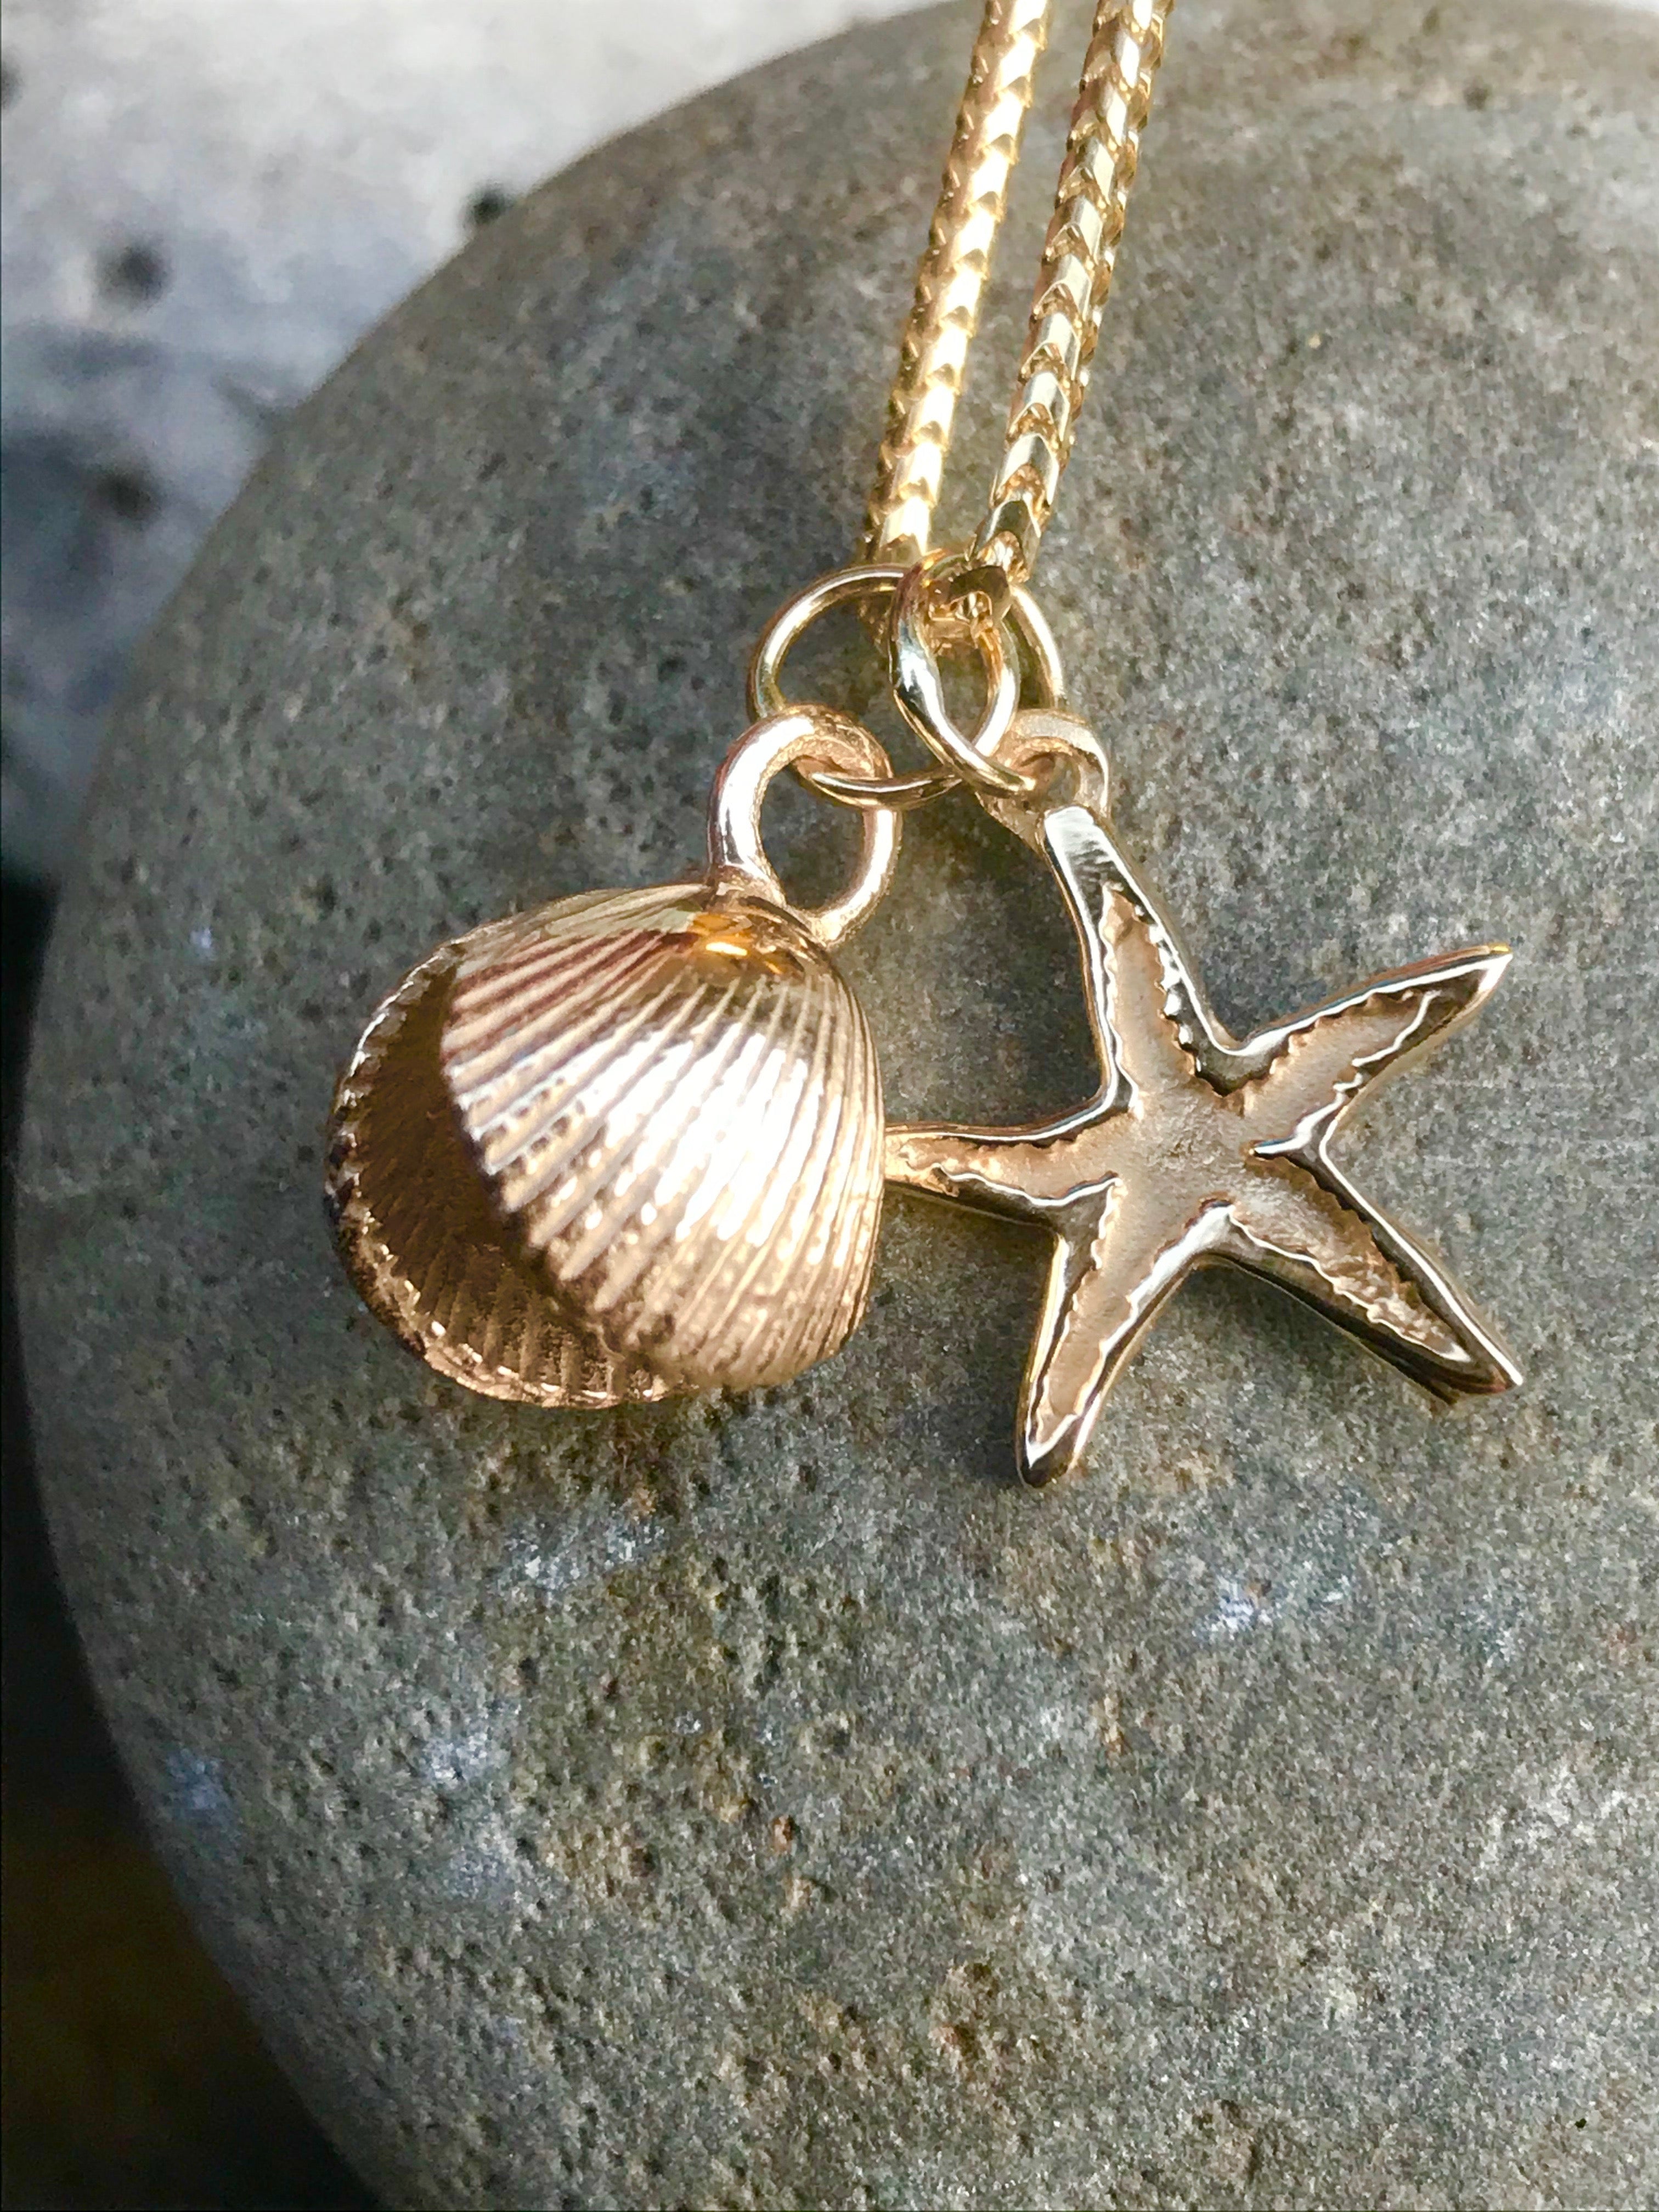 NM18645 Natural Cowrie Shell Seashell Pendant Gold Plated Chain Necklace  Minimal Minimalist Beach Jewelry Bridesmaid Gift - AliExpress